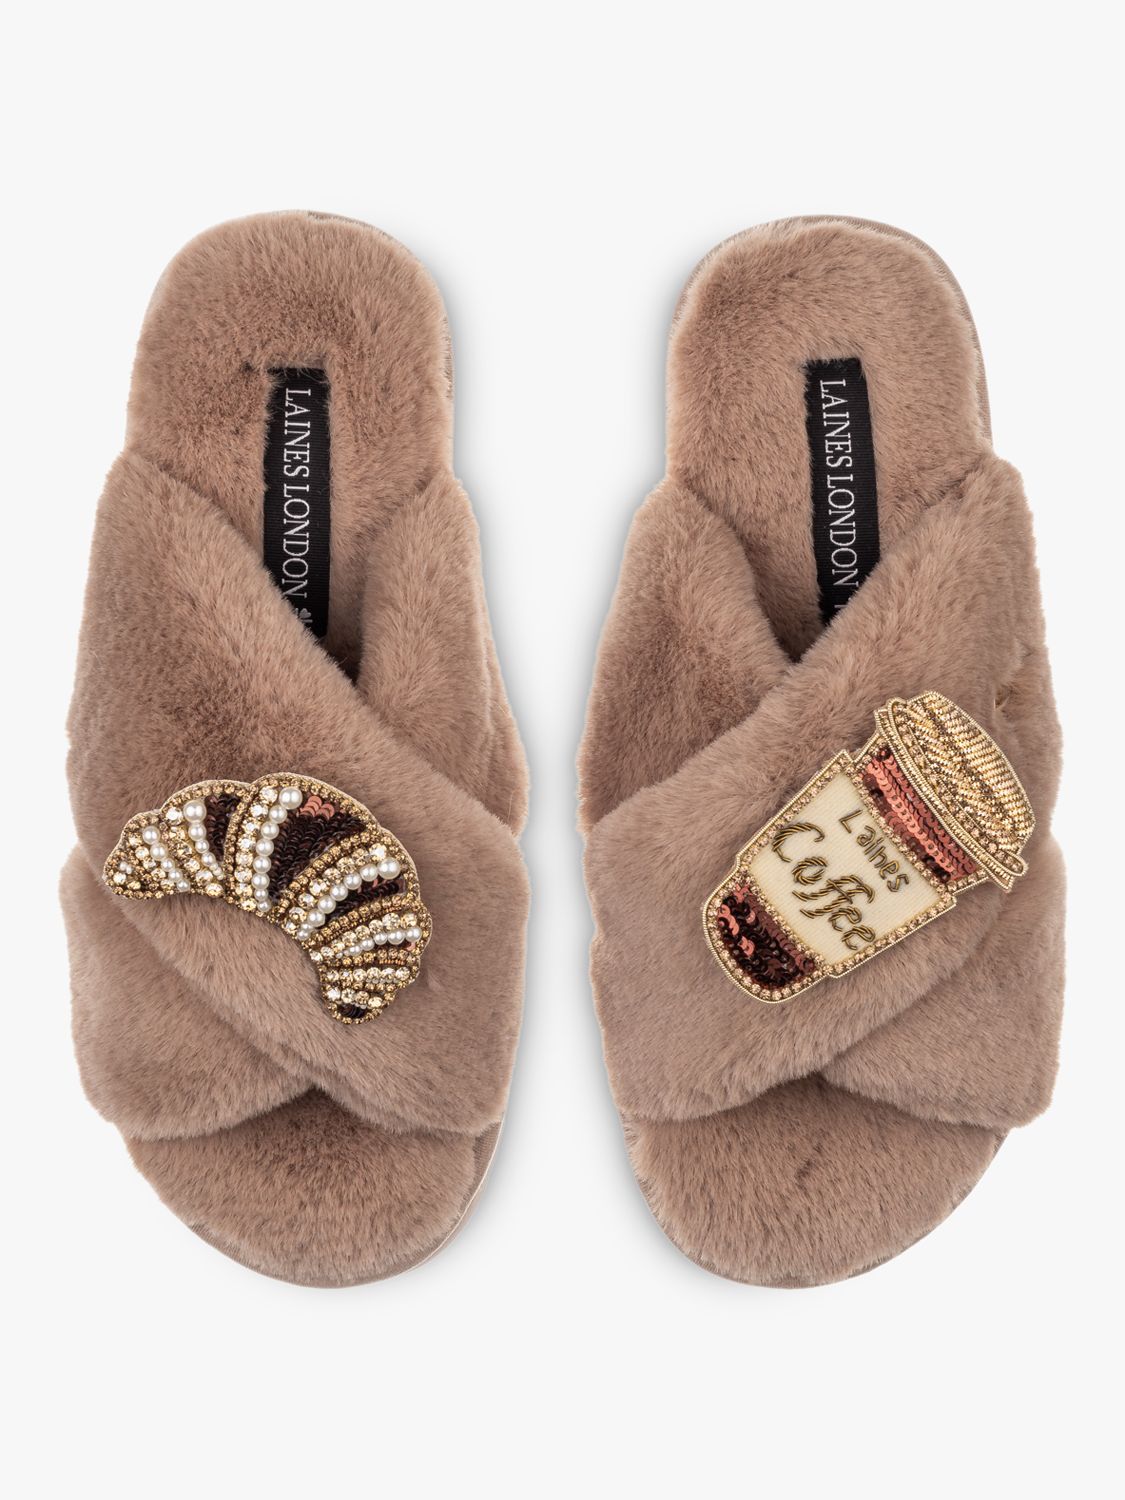 Laines London Coffee & Croissant Slippers, Toffee at John Lewis & Partners